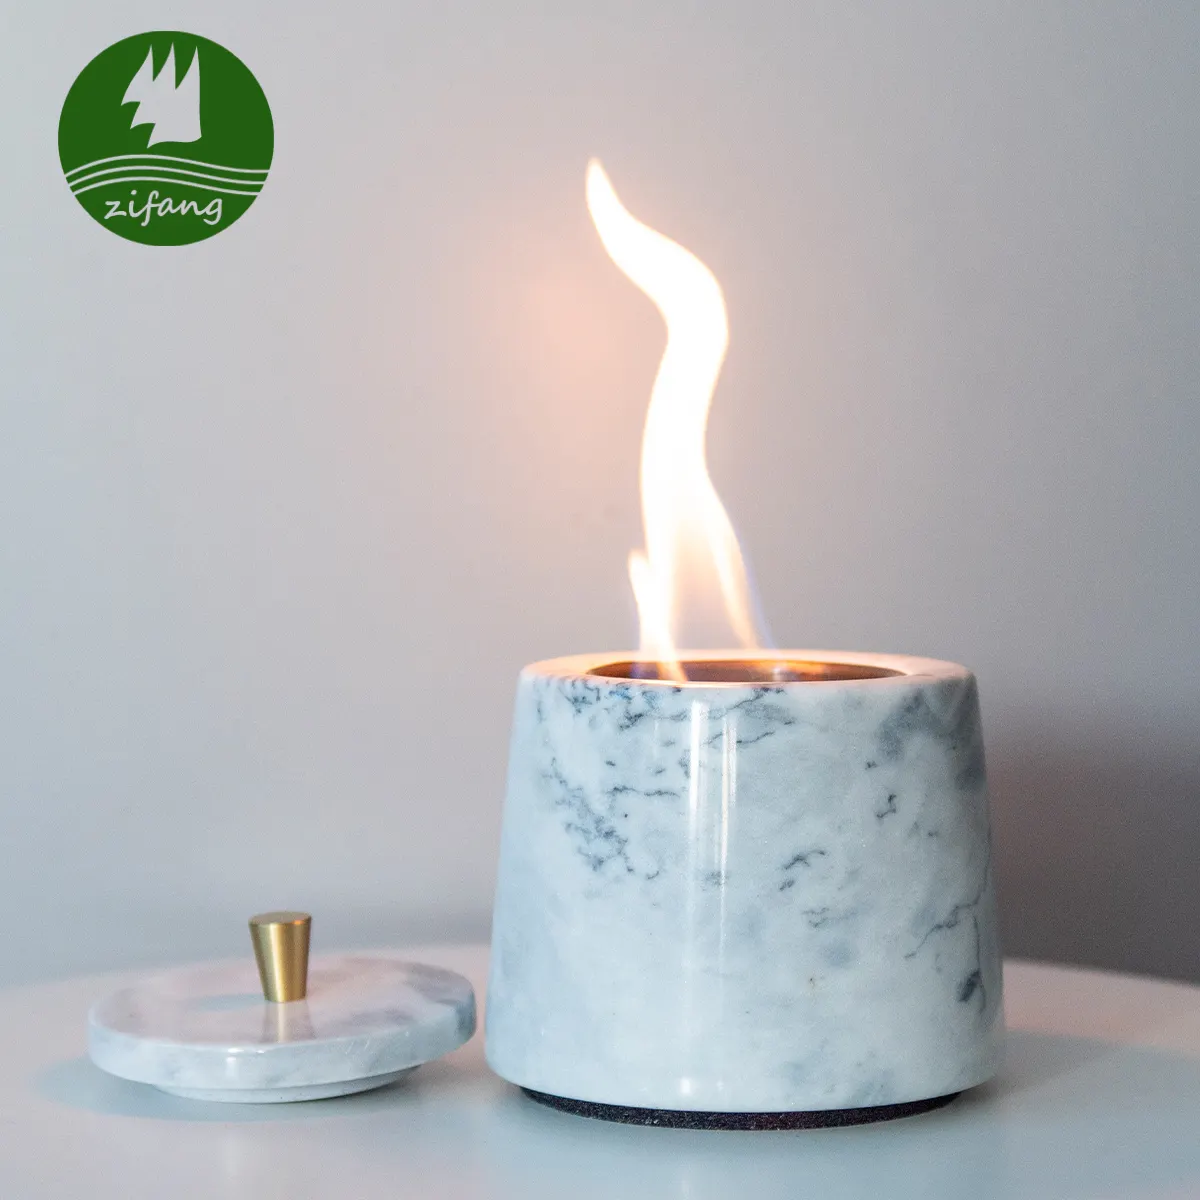 Wholesale Smokeless Real Marble Stone Table Top Mini Personal Tabletop Portable Alcohol burner Firepit Bio ethanol Fire pit